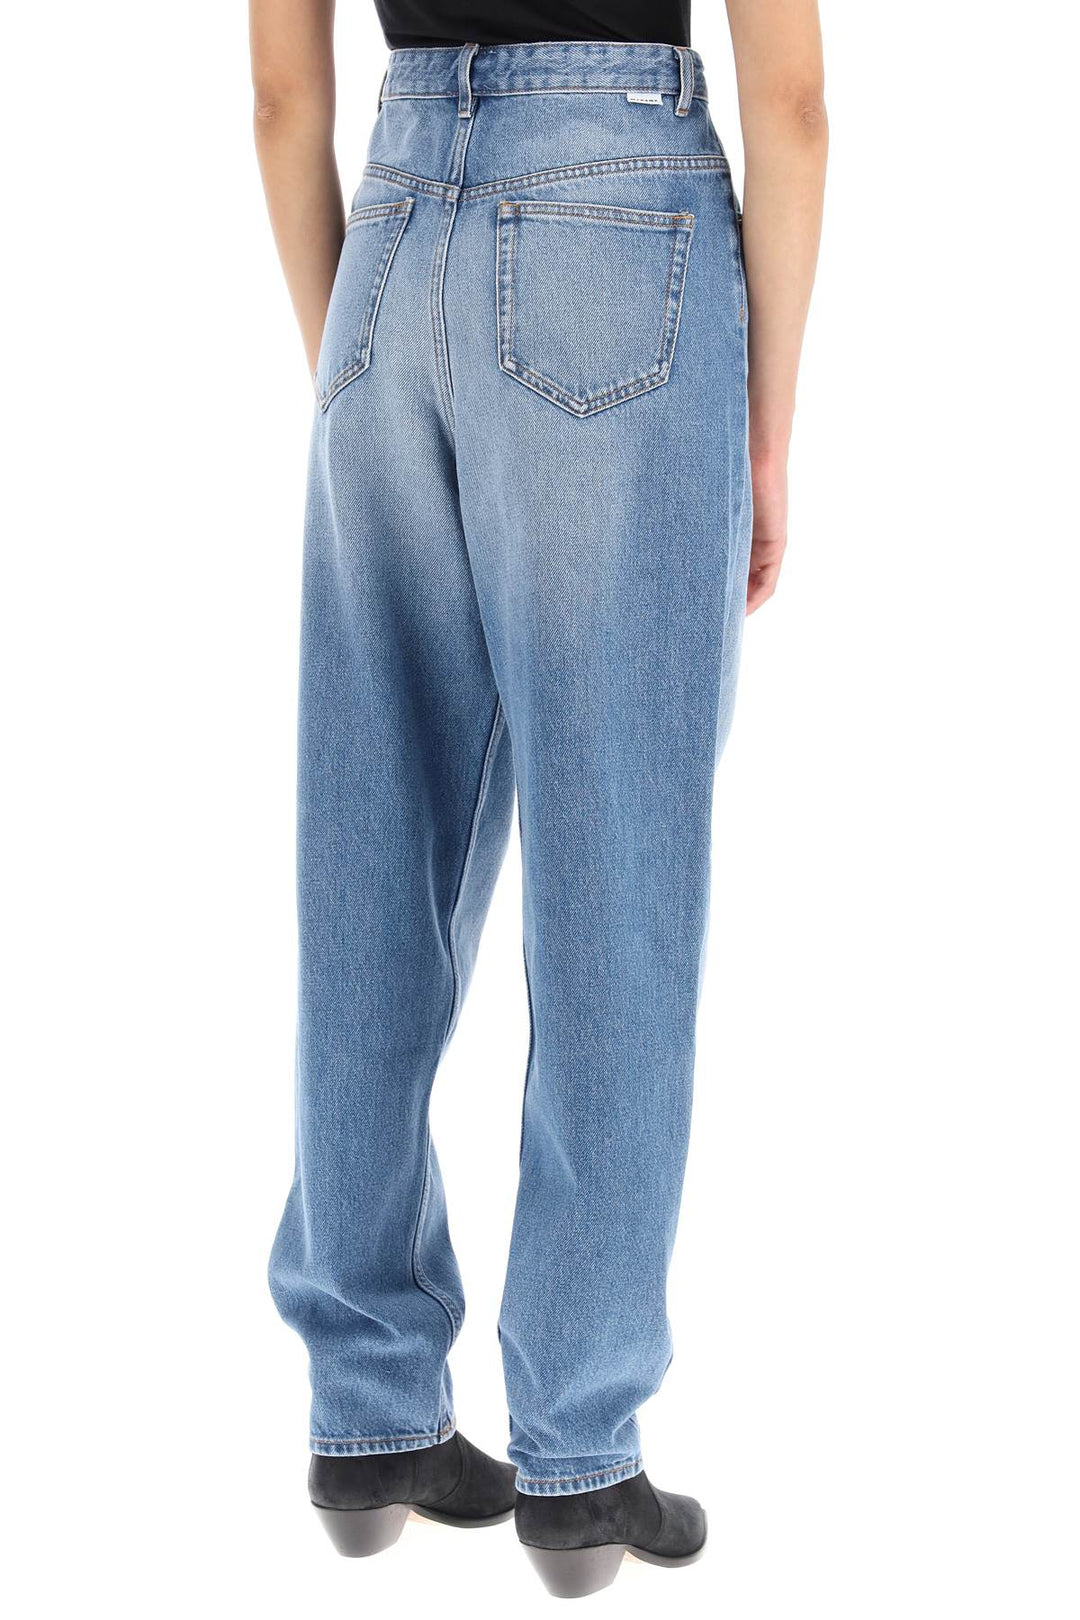 Isabel Marant Etoile 'Corsy' Loose Jeans With Tapered Cut   Celeste